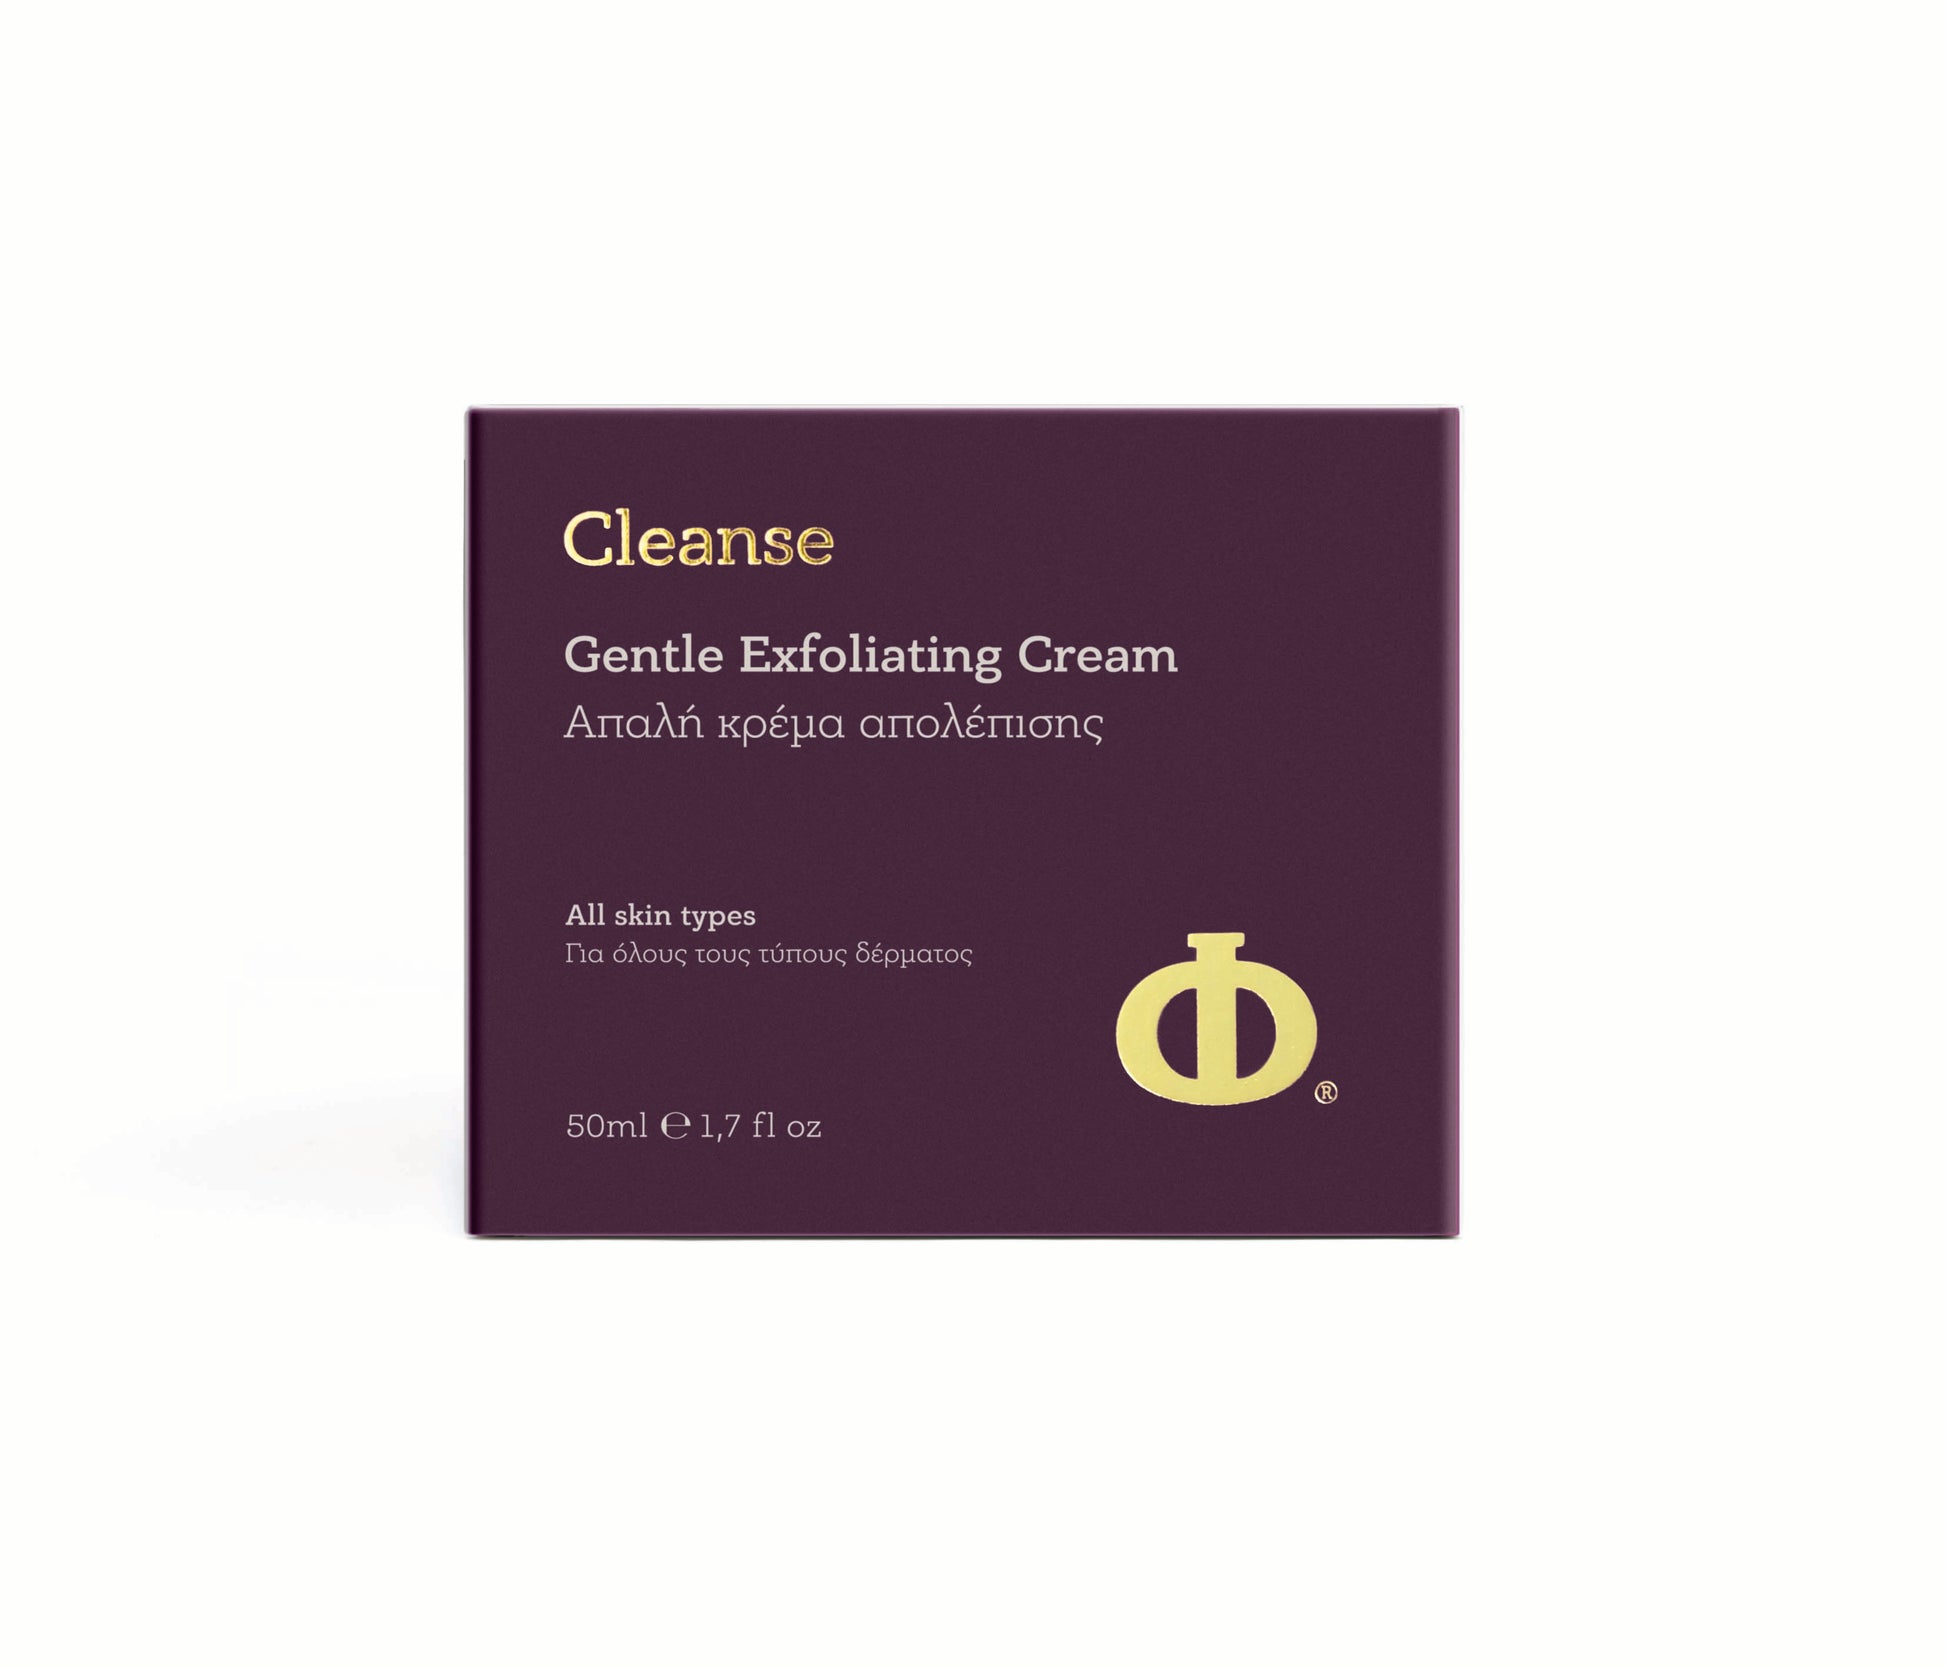 Philab Gentle Exfoliating Cream packaging with purple background and gold logo.